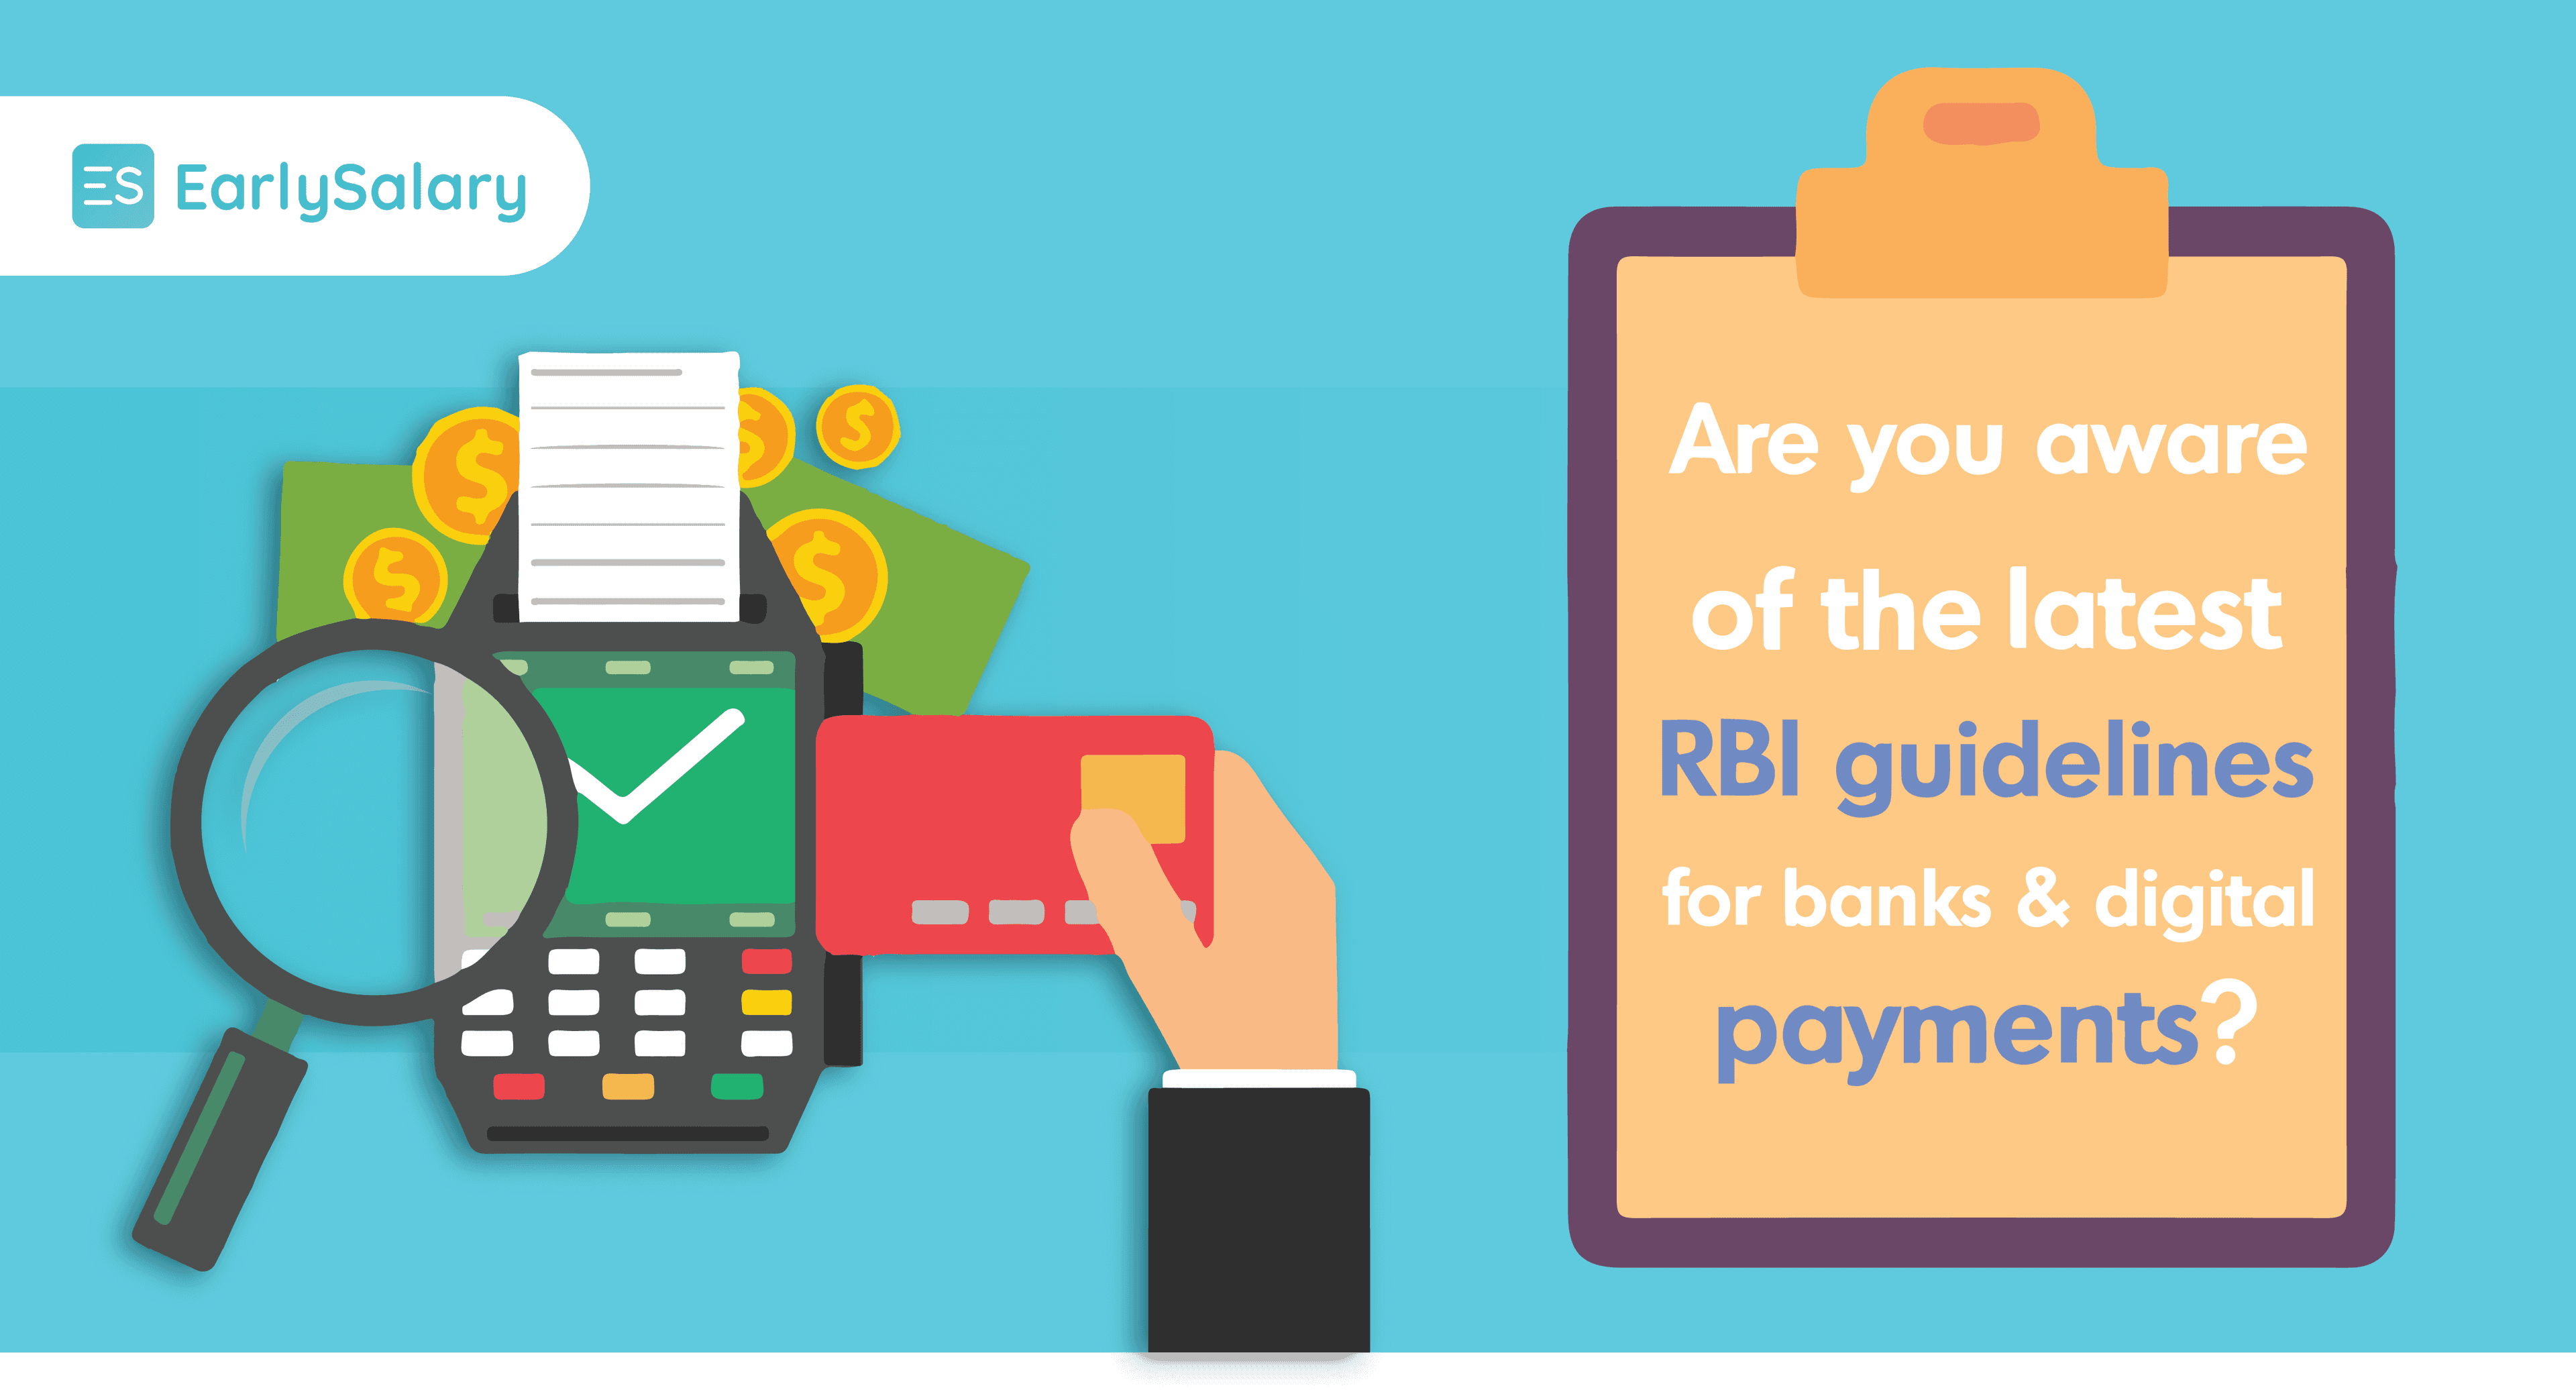 Latest RBI Guidelines For Banks And Digital Payments. Do You Know?